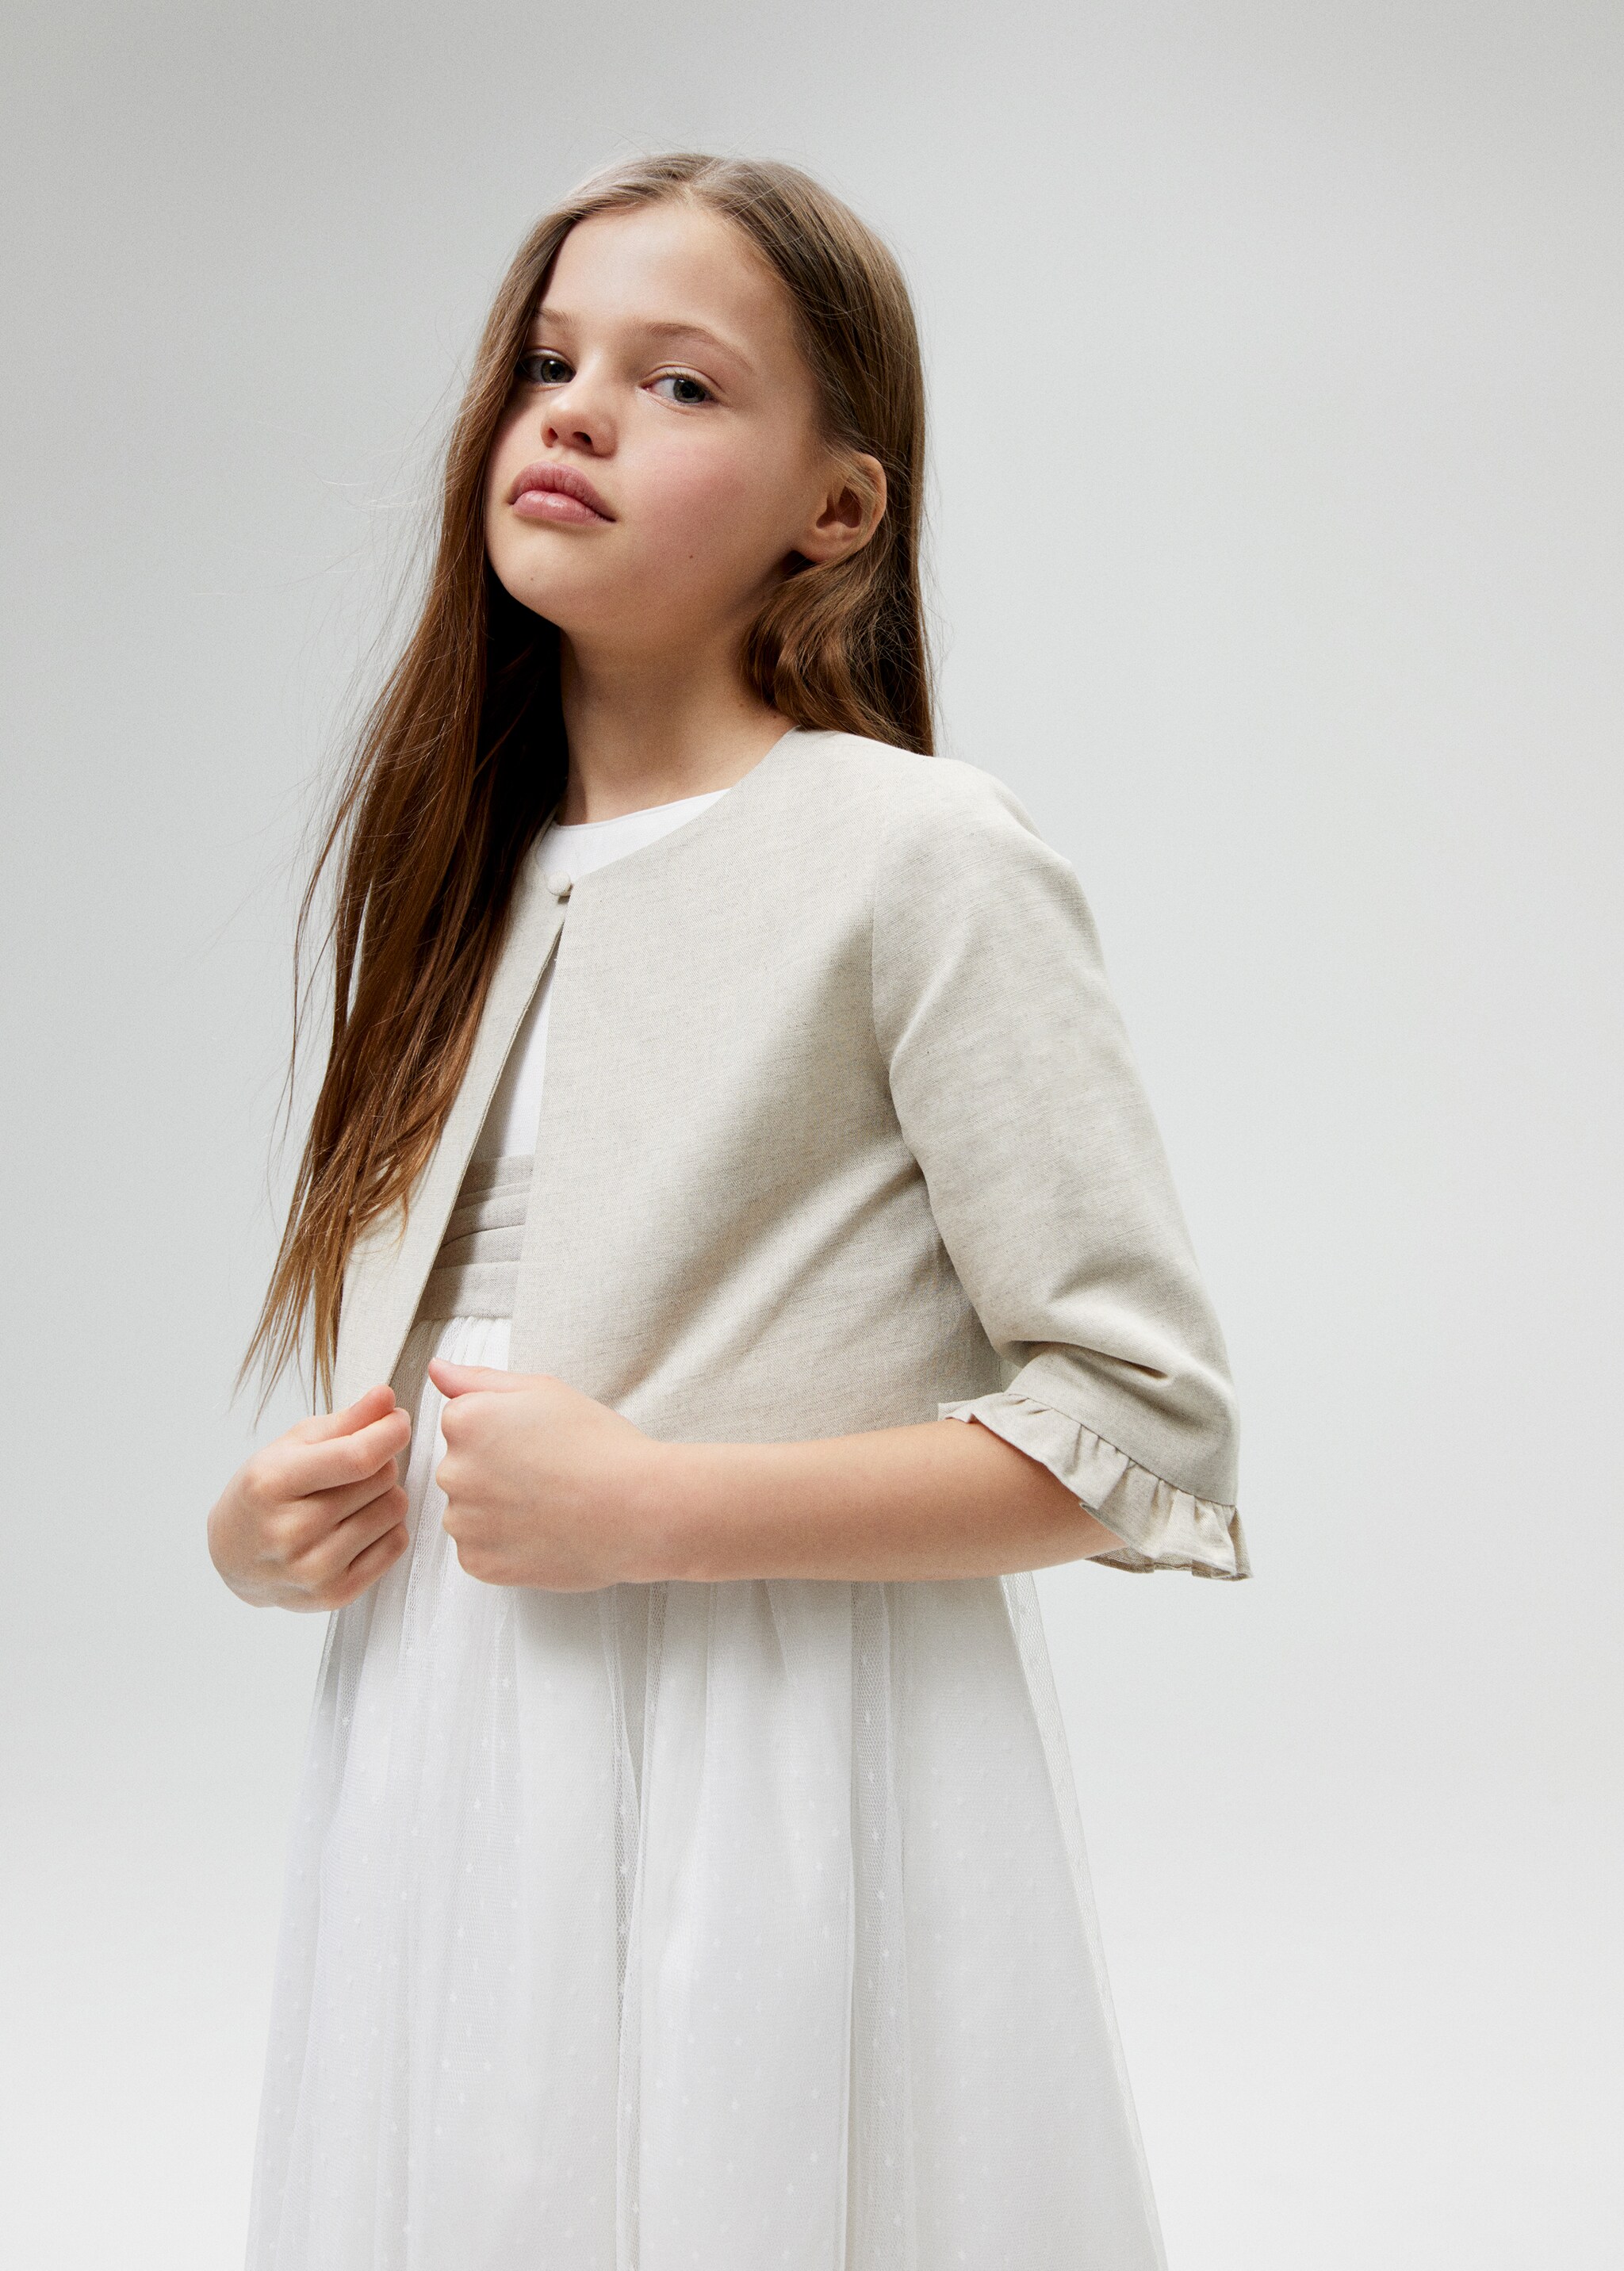 Ruffled linen jacket - Details of the article 5